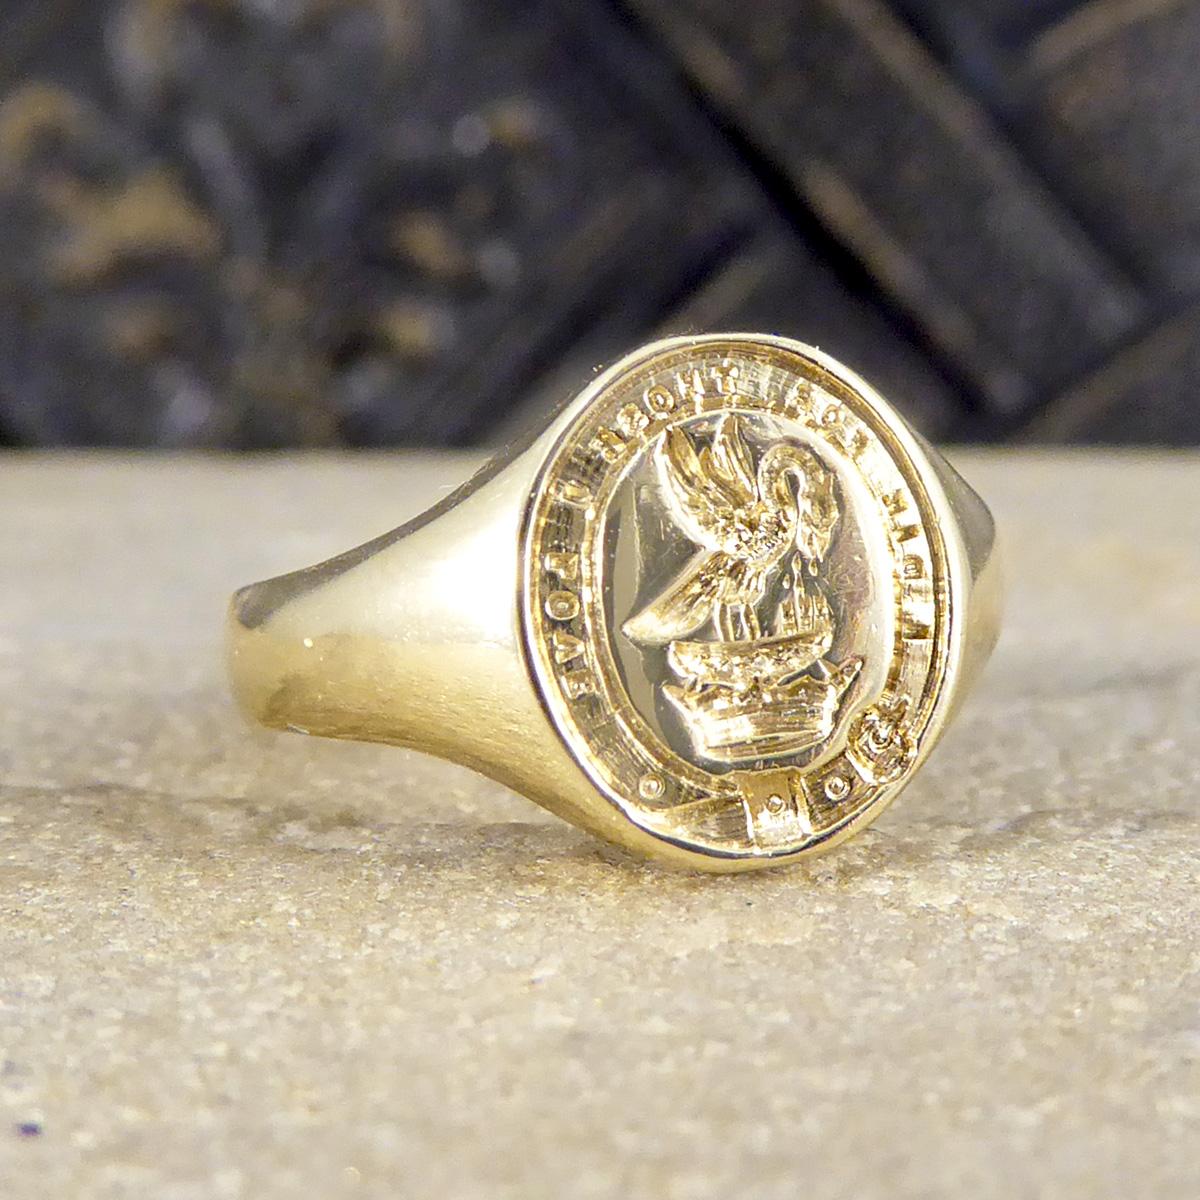 The signet ring is a classic and staple addition to any mans finger. It has become a universal unisex ring now and most commonly worn on the pinky finger. This ring is beautifully unique with a bird/dragon-like figure over a boat crested into the